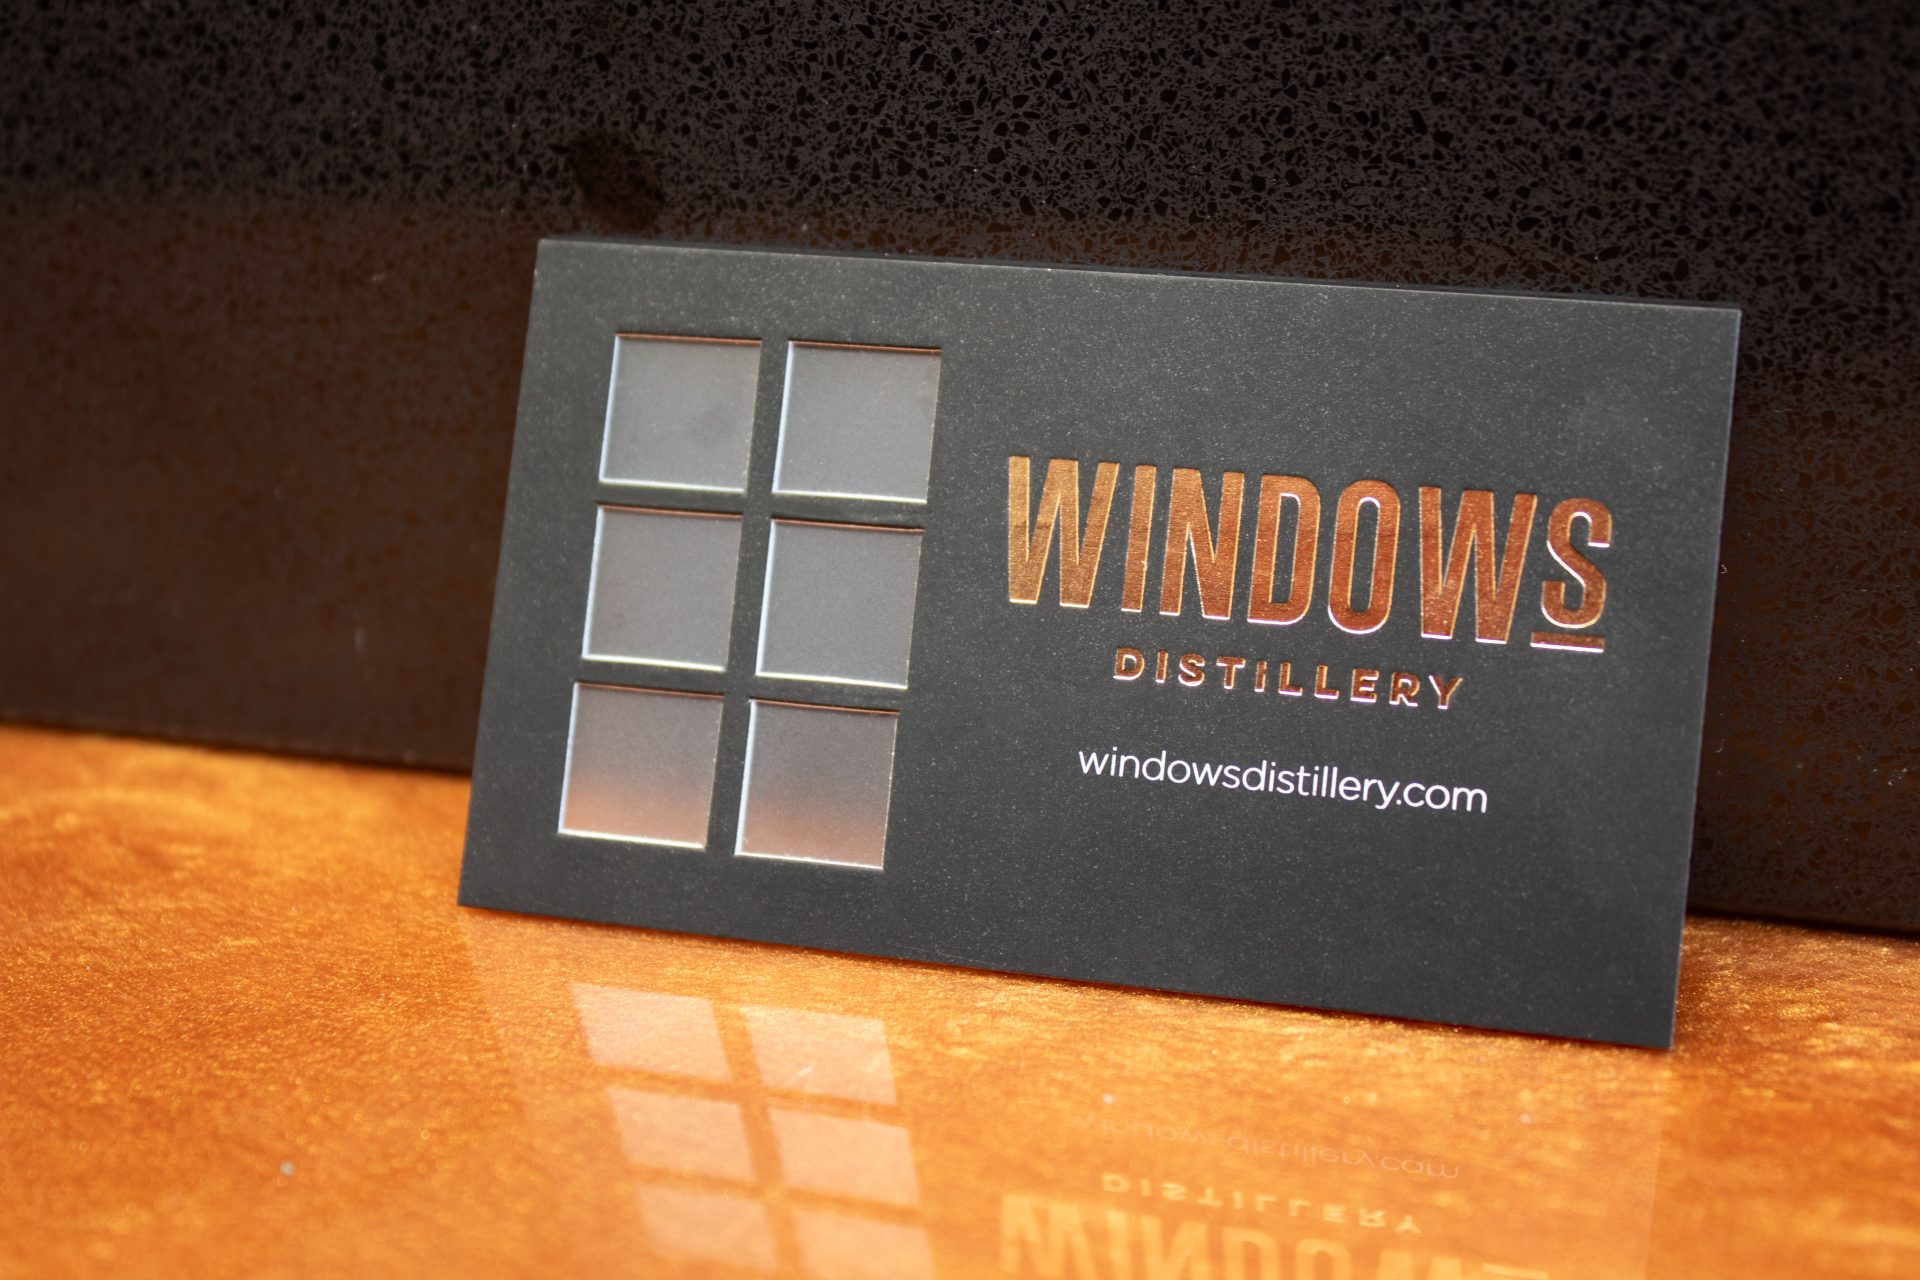 Windows Distillery business cards with luxury paper that is soft touch, high quality, and thicker than most business cards.